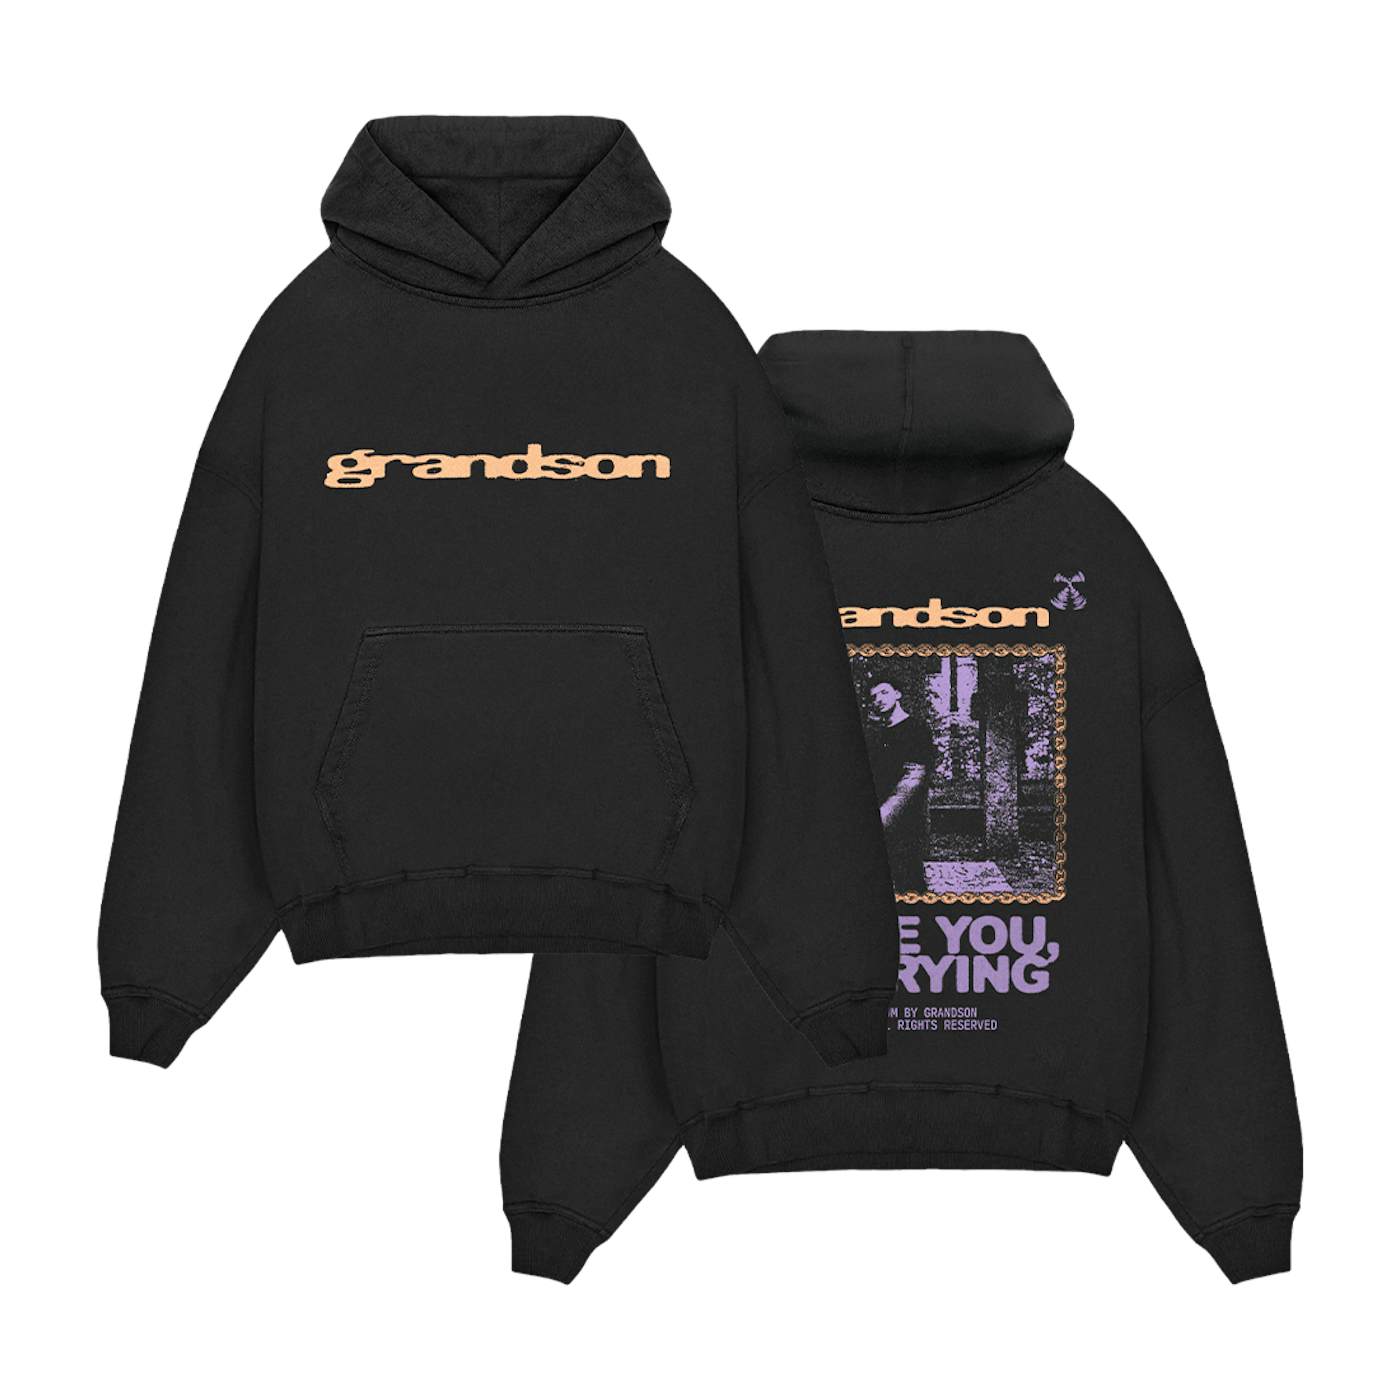 grandson I LOVE YOU I’M TRYING HOODIE